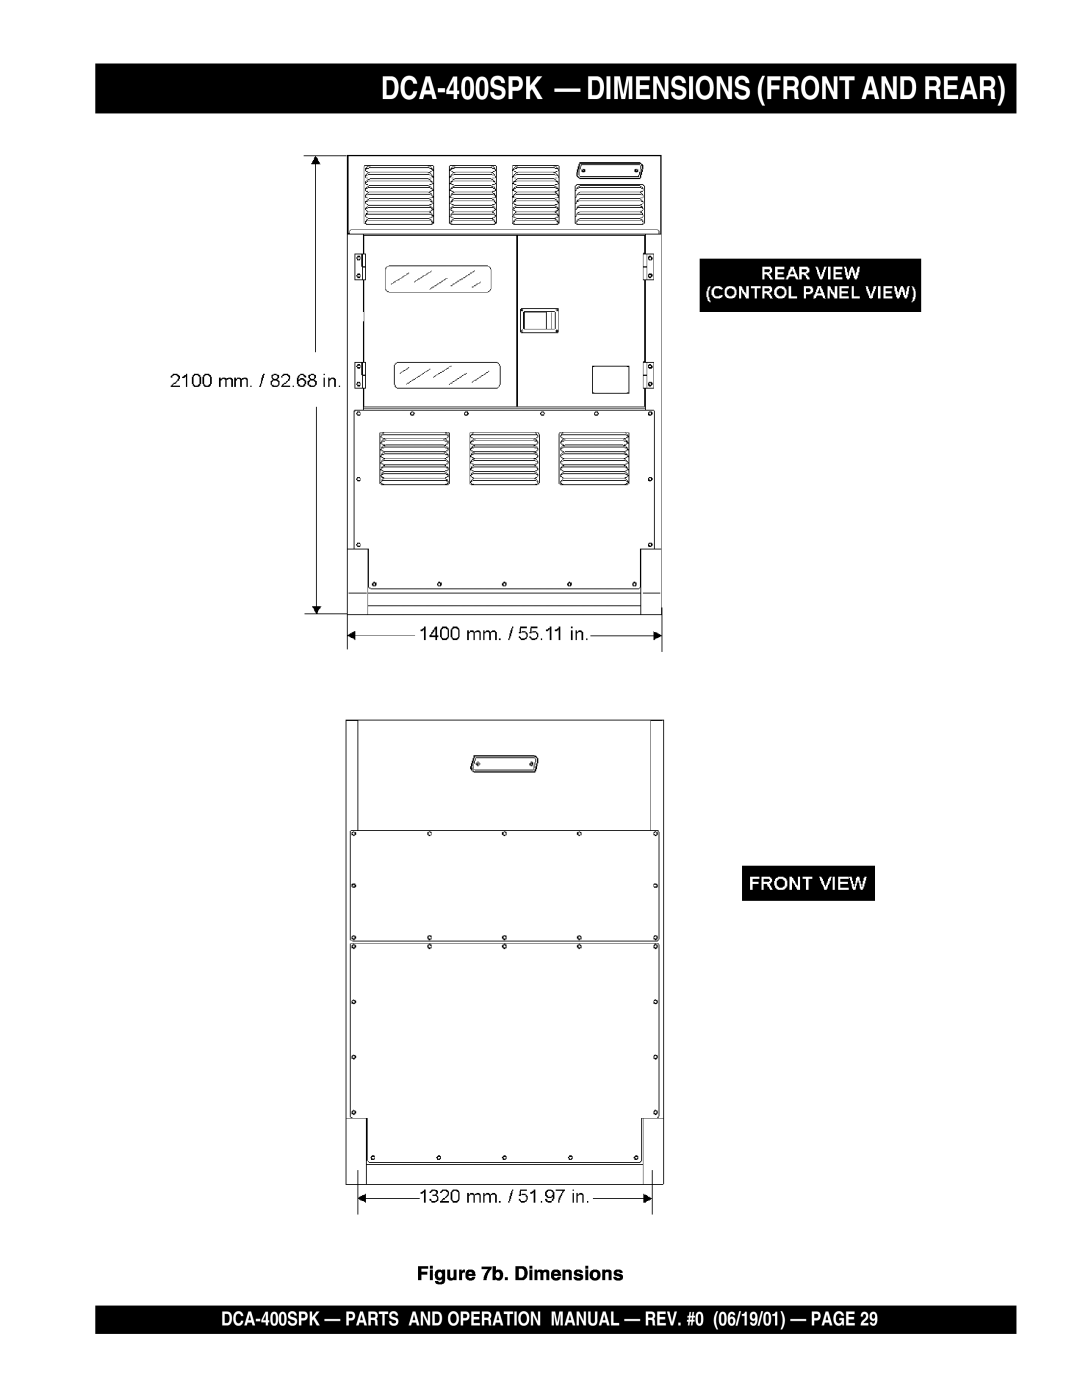 Multiquip operation manual DCA-400SPK— DIMENSIONS FRONT AND REAR, b. Dimensions 